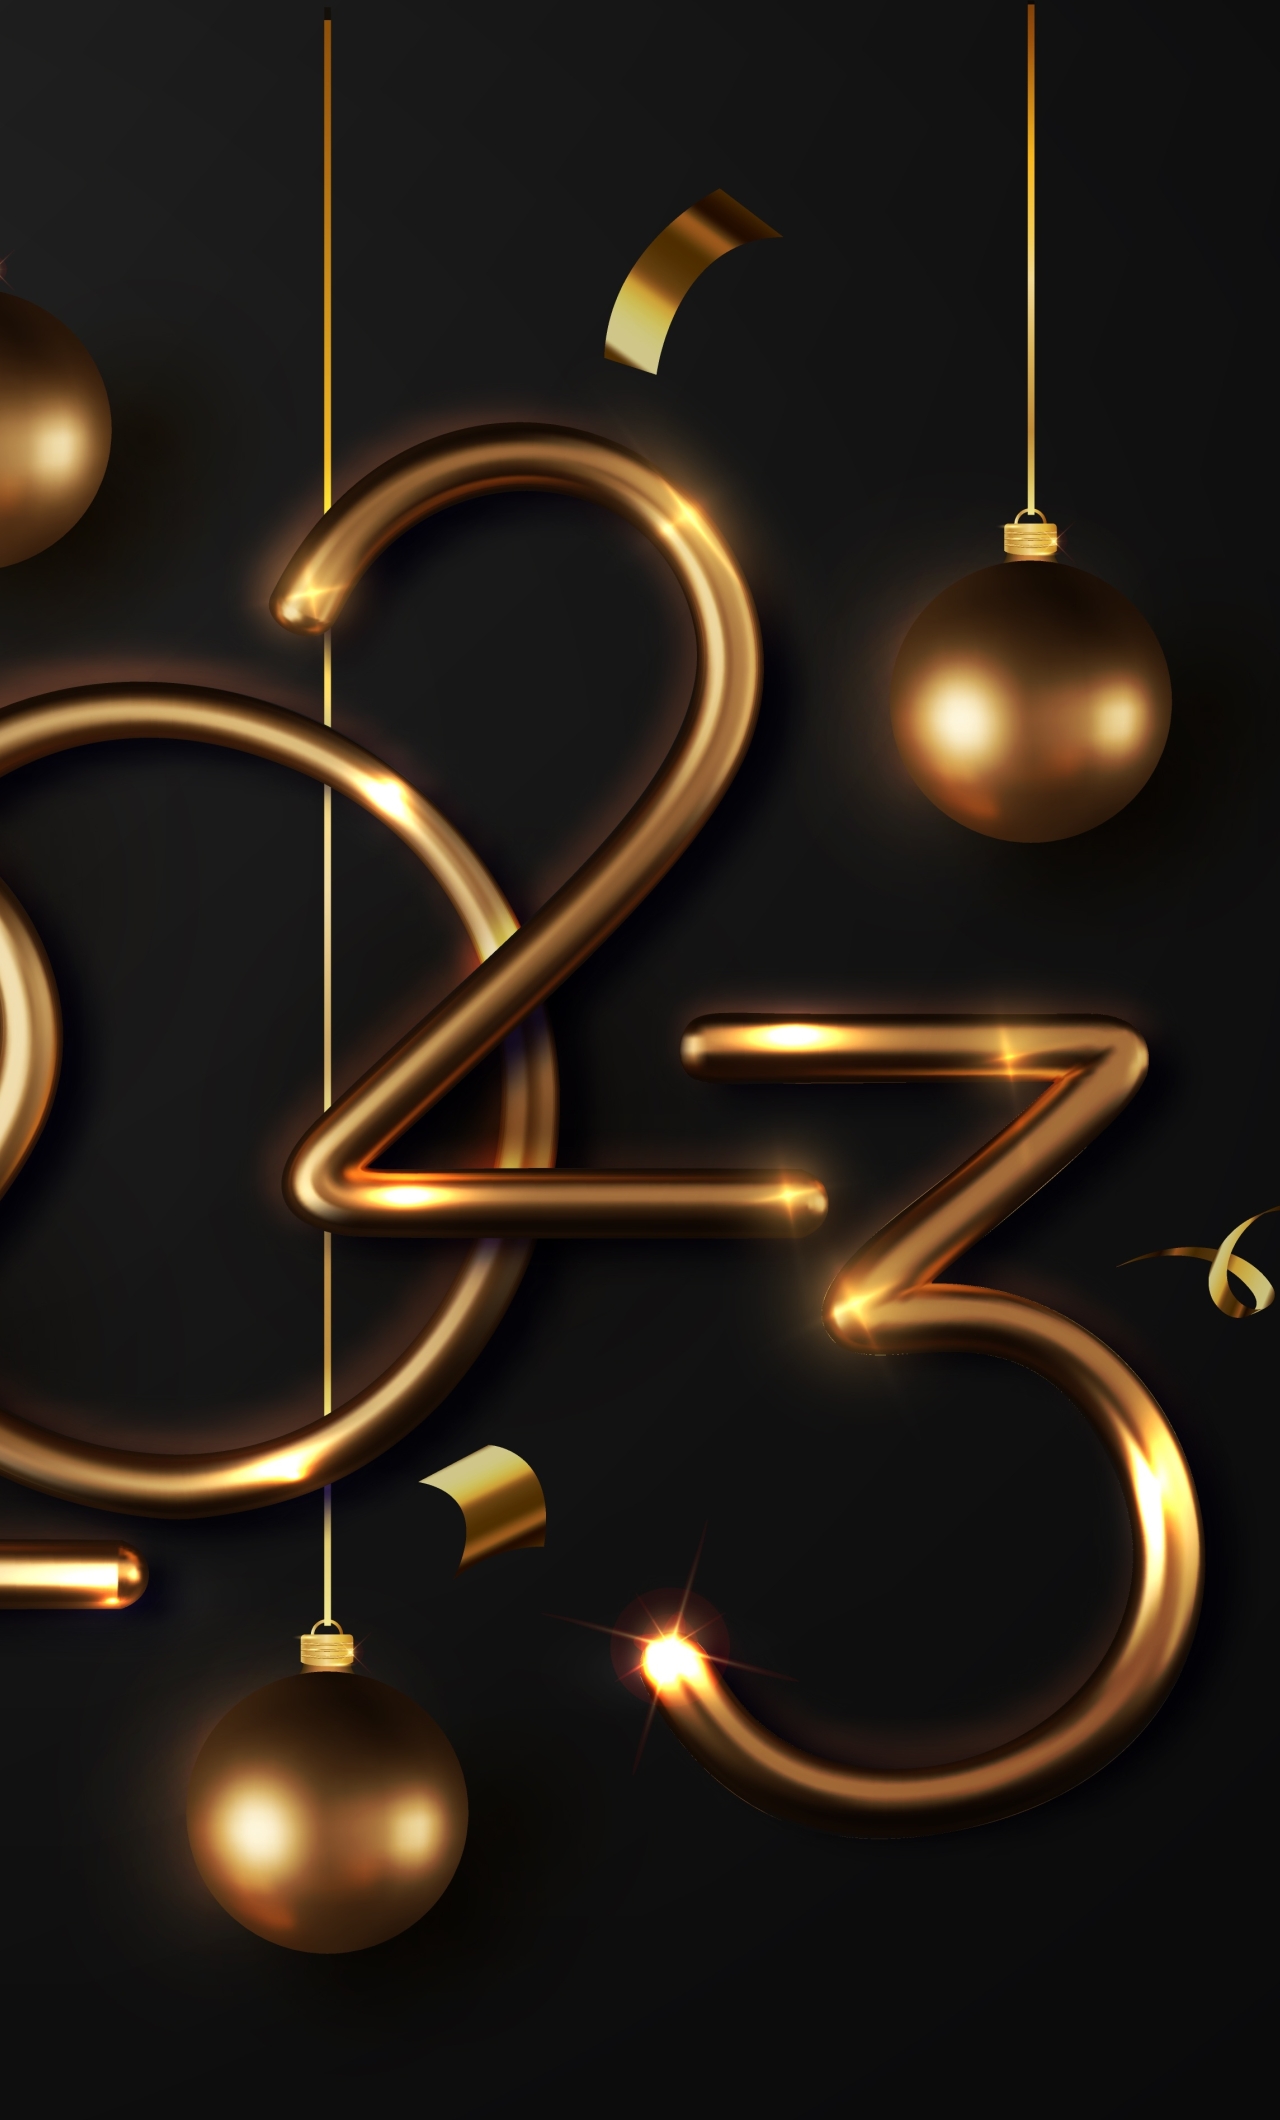 15 Best New Year 2023 wallpapers for iPhone Free HD download  iGeeksBlog